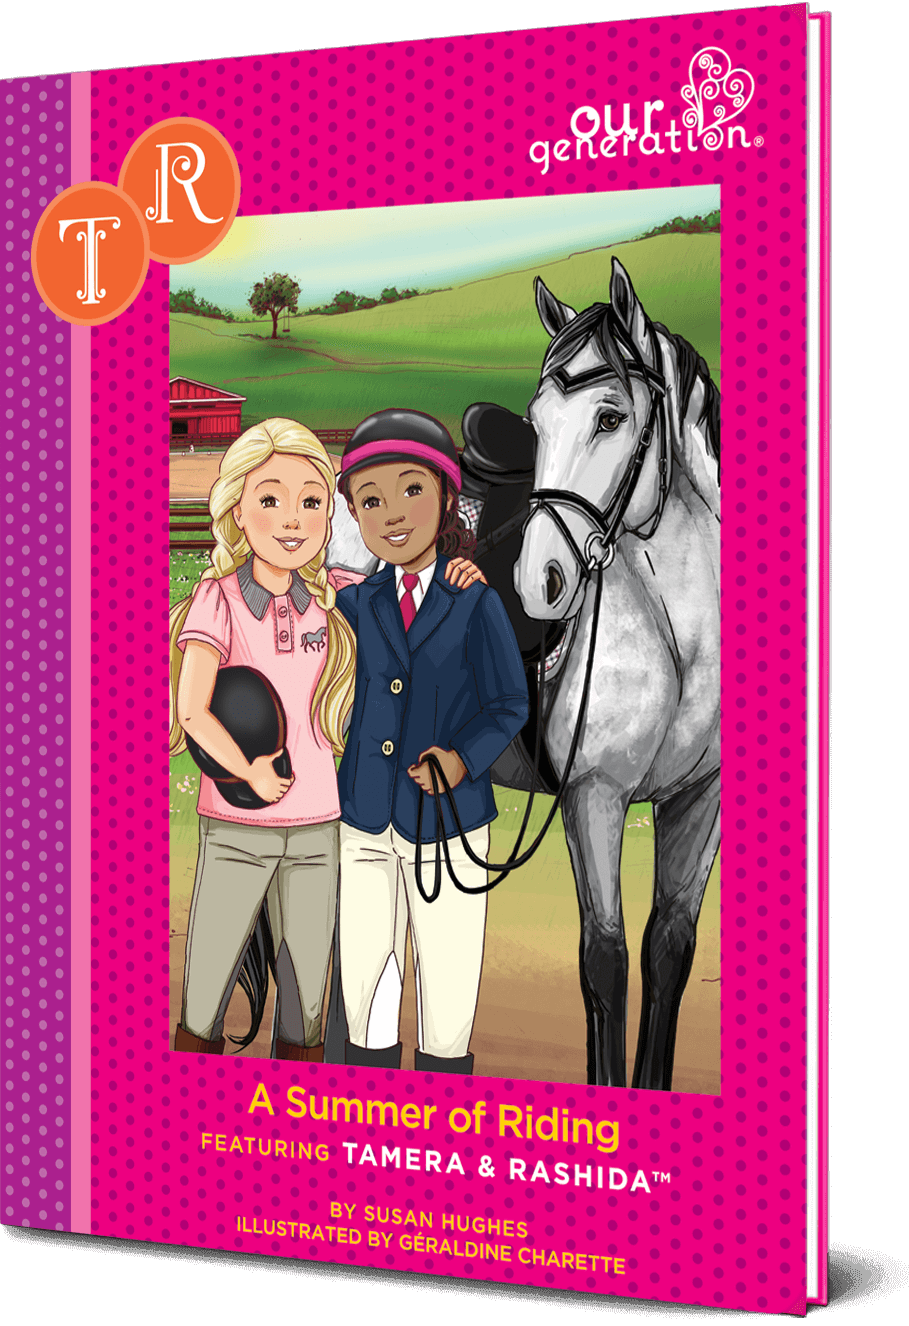 Tamera | 18-inch Equestrian Doll Brown Hair | Our Generation